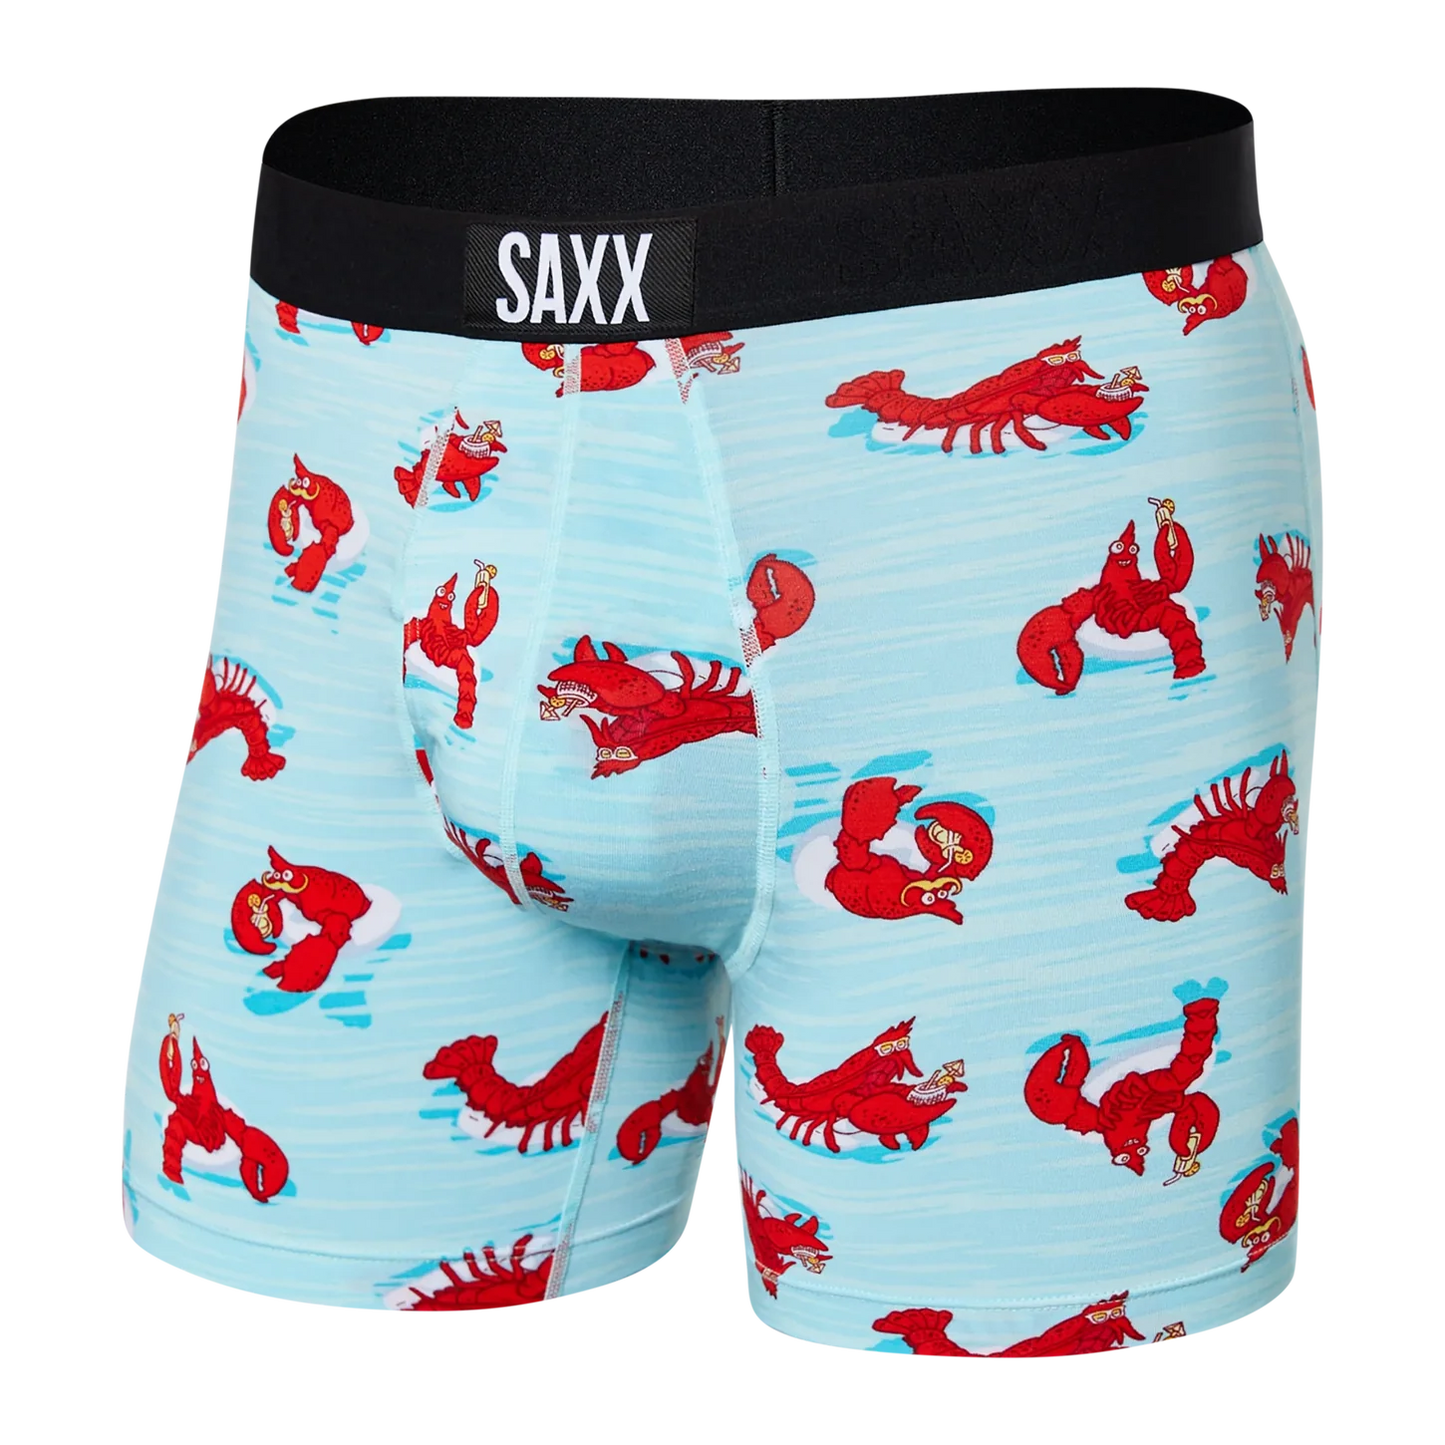 Ultra Boxer Brief (With Fly Opening) Underwear Saxx LLA S 